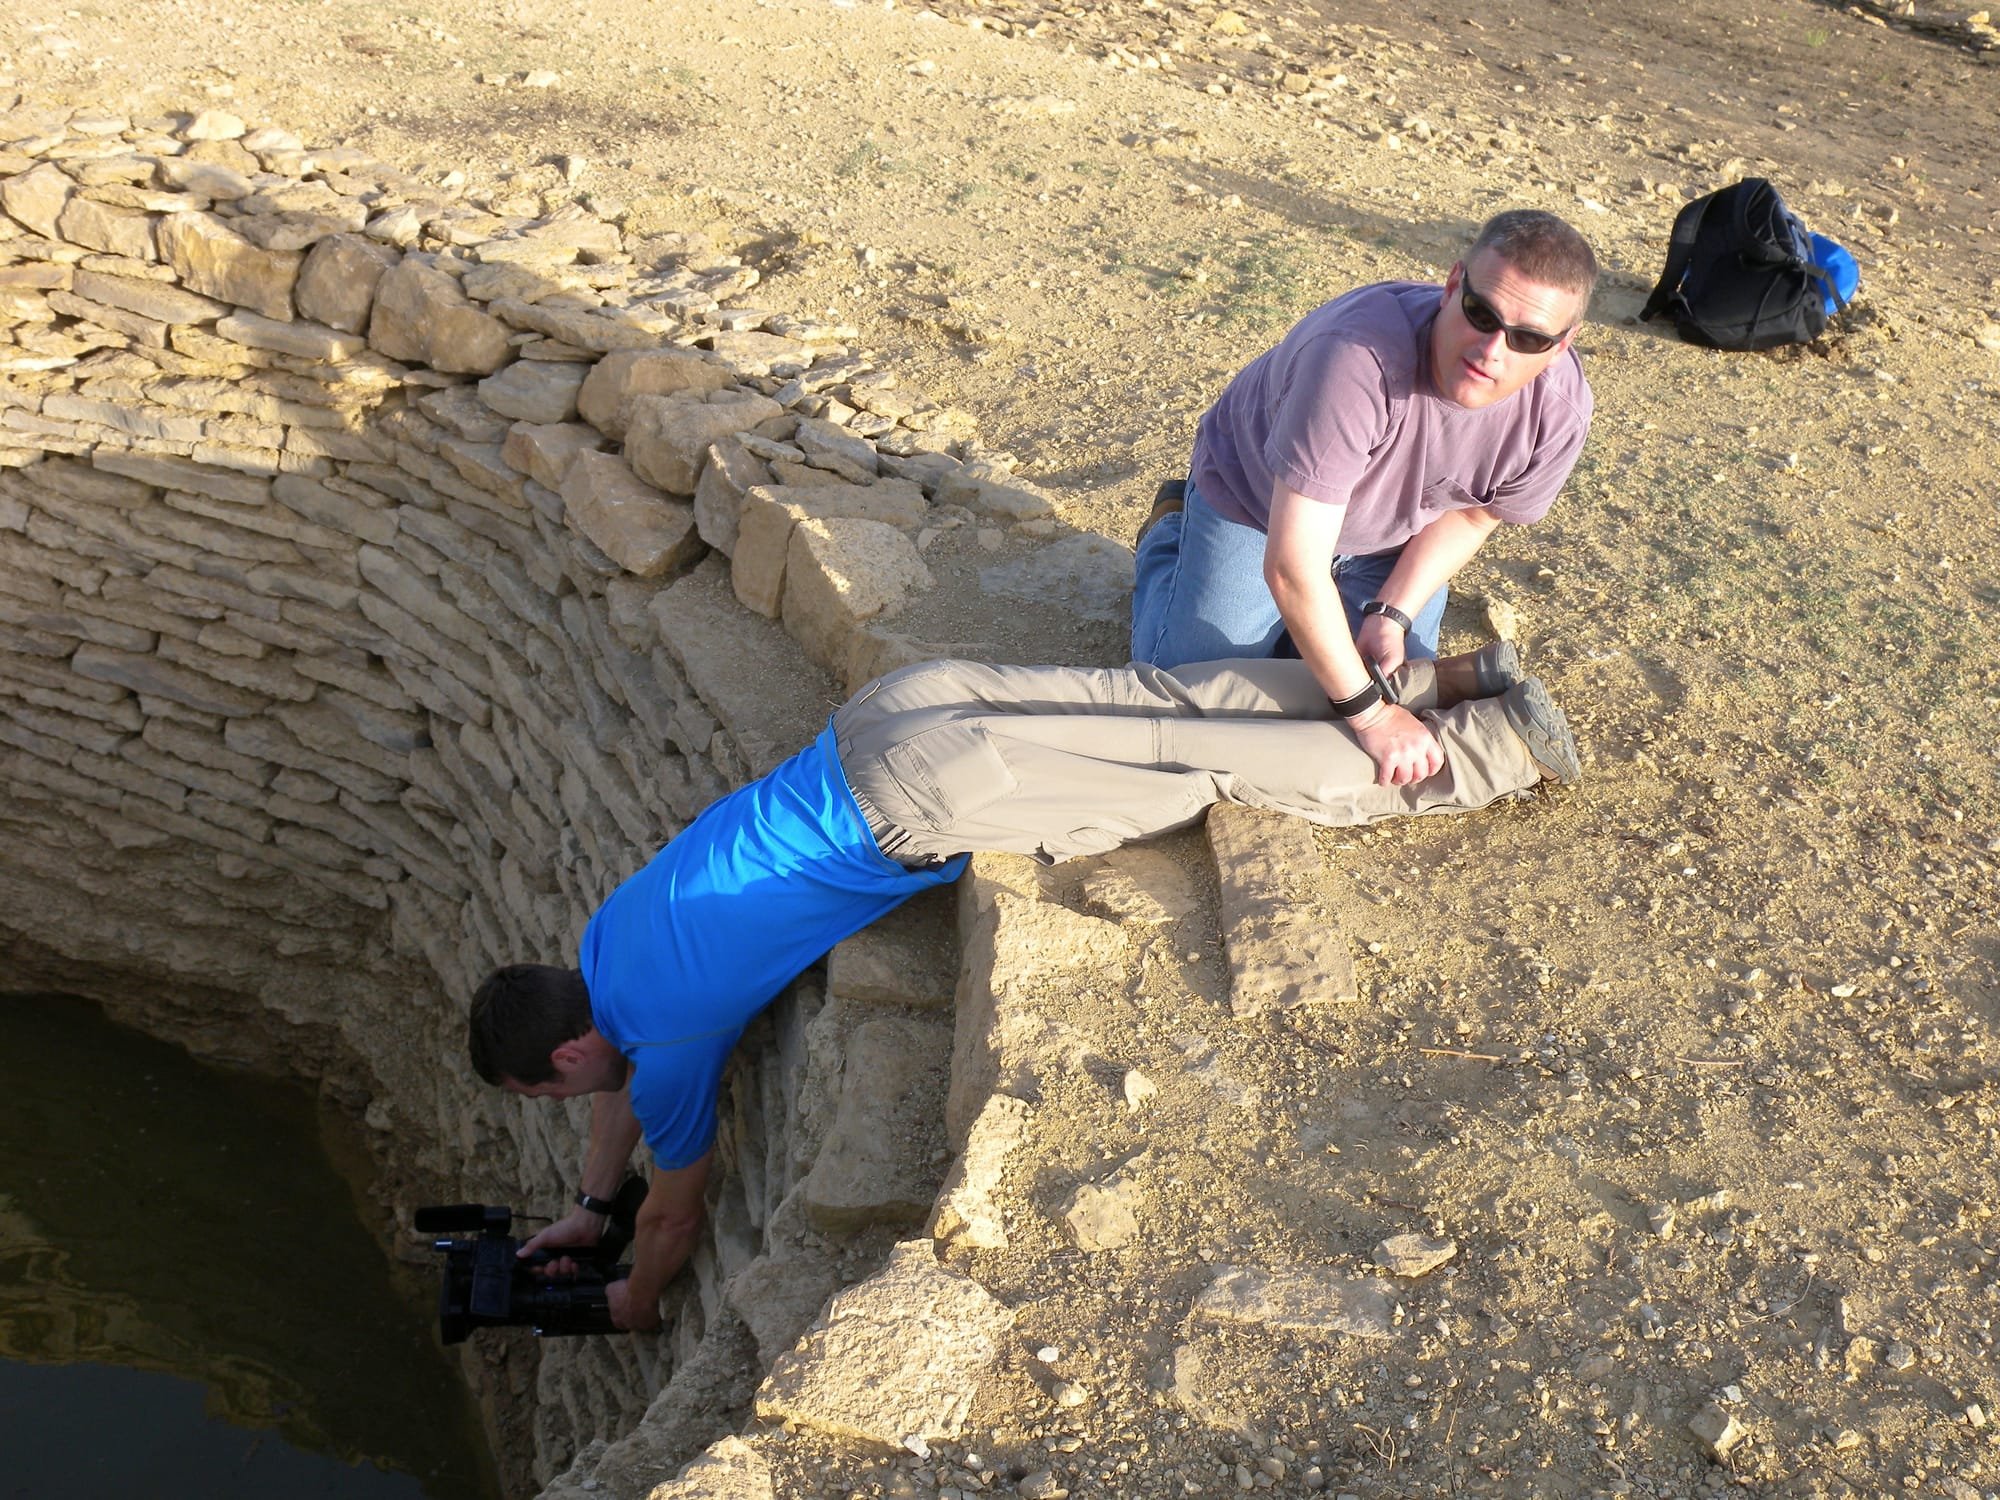 Shooting in a water well in Ethiopia for Water.org.